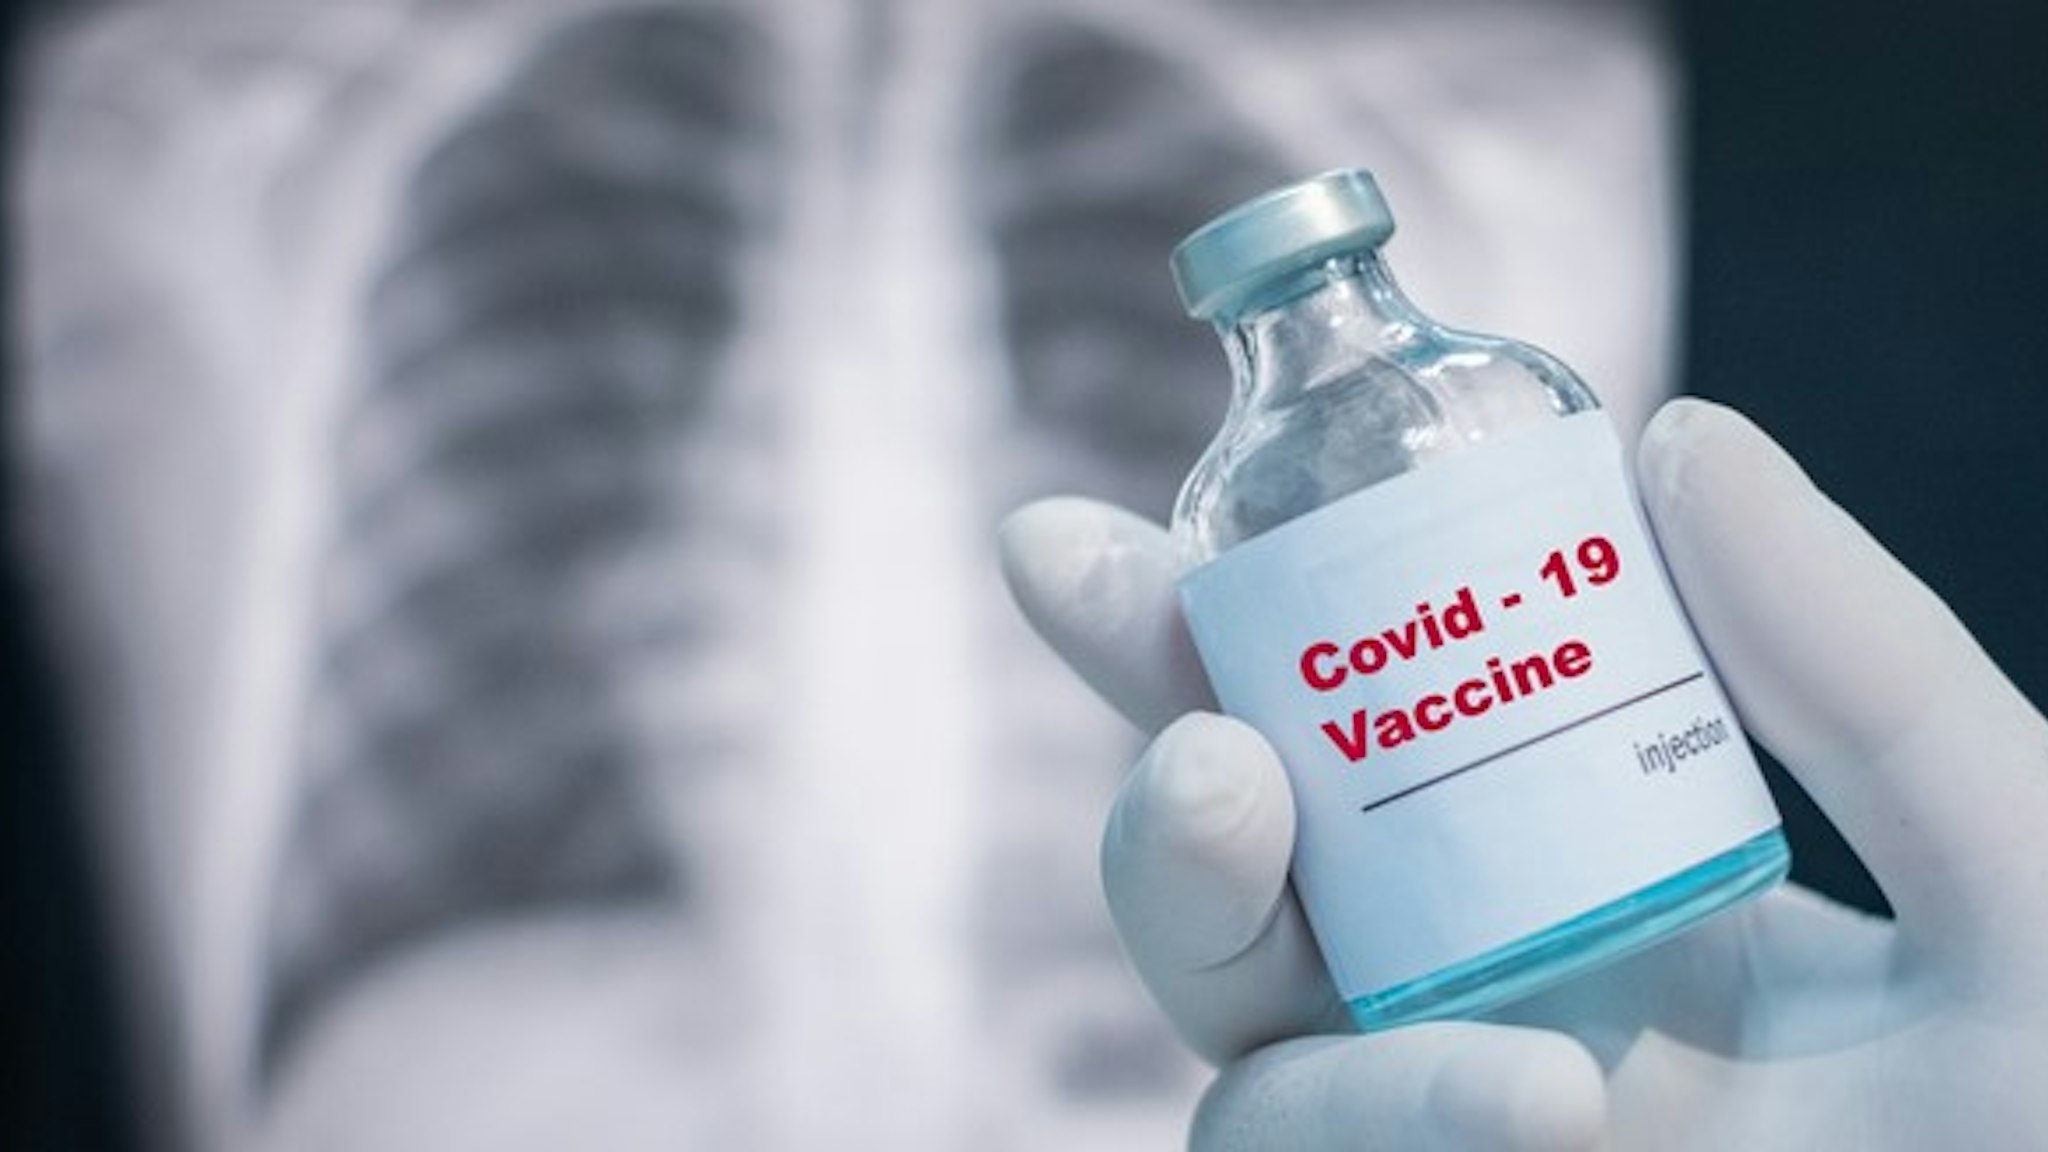 Doctor's hand holding a covid-19 vaccine vial on Chest x-ray background